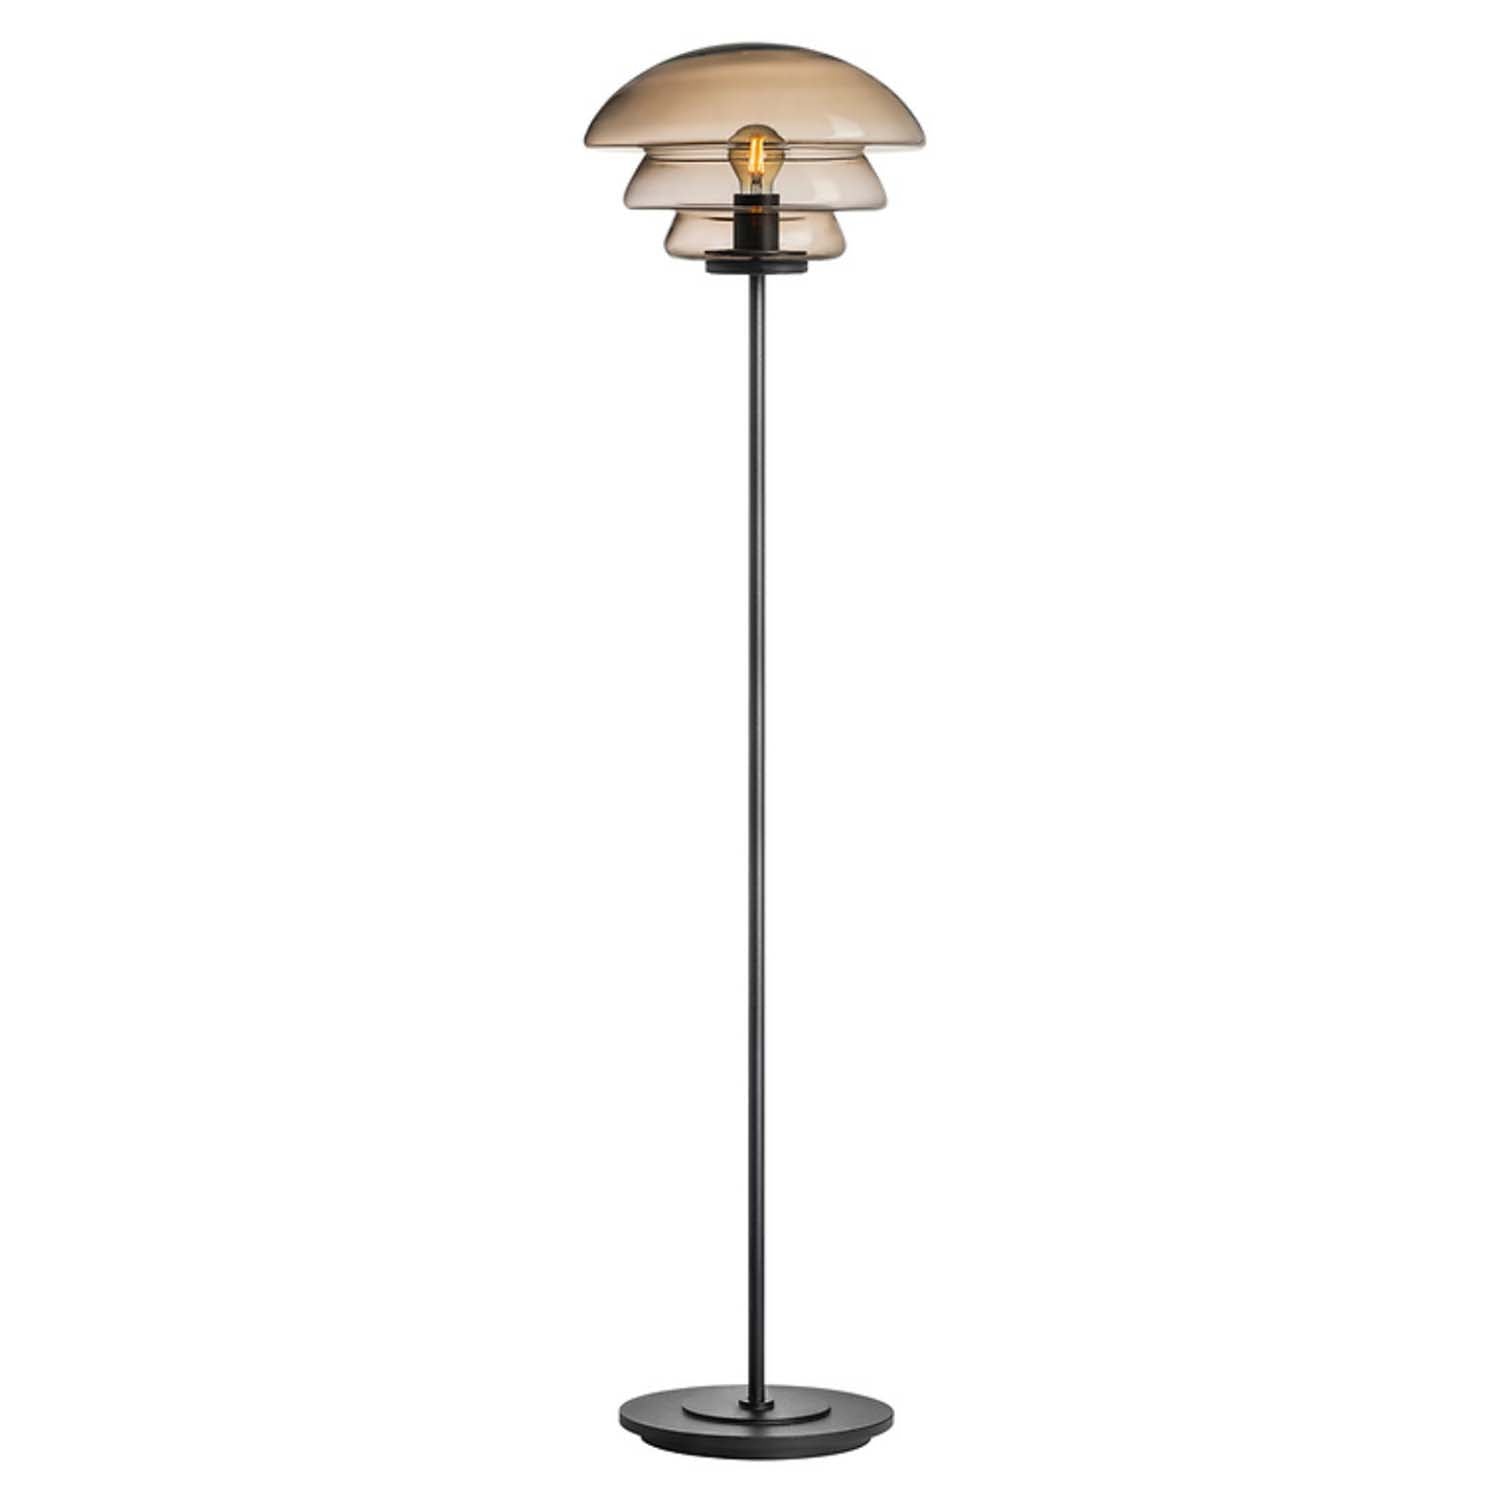 ARCHIVE 4006 - Handcrafted blown glass floor lamp